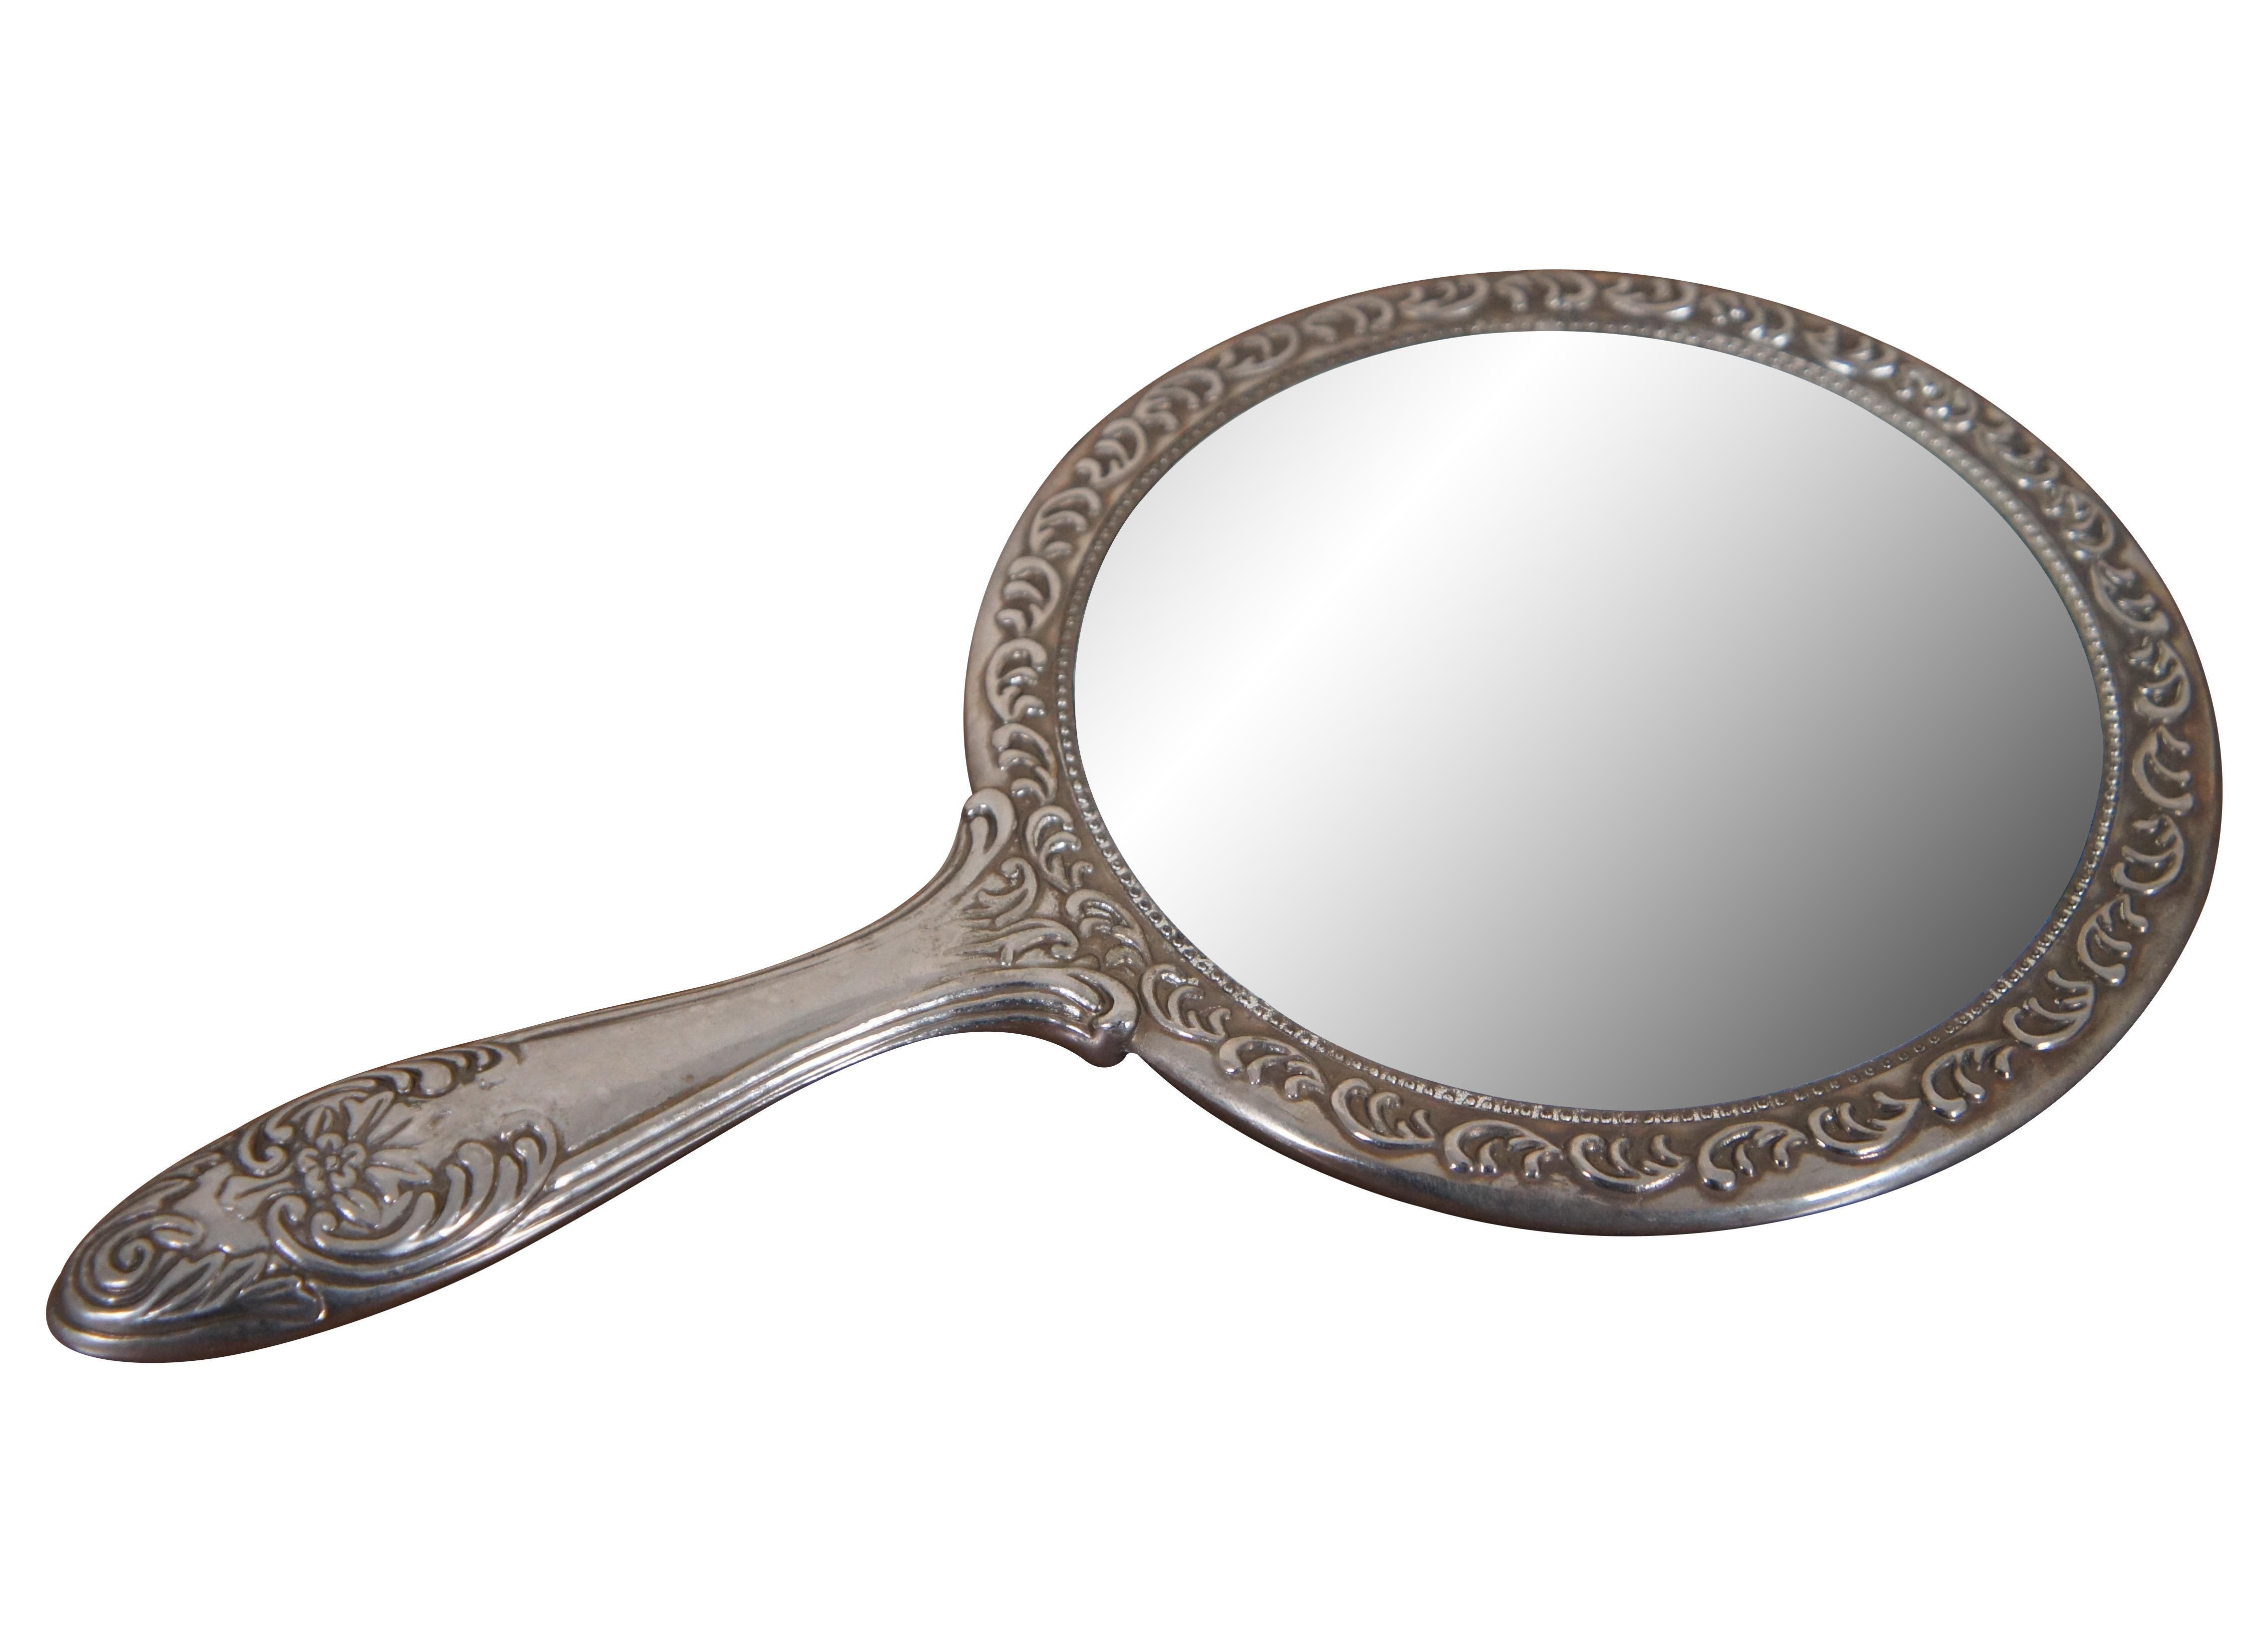 Antique Victorian Silver Hand Mirror. Features a beautiful repousse design of foliate / flowers. Unmarked. Measure: 9